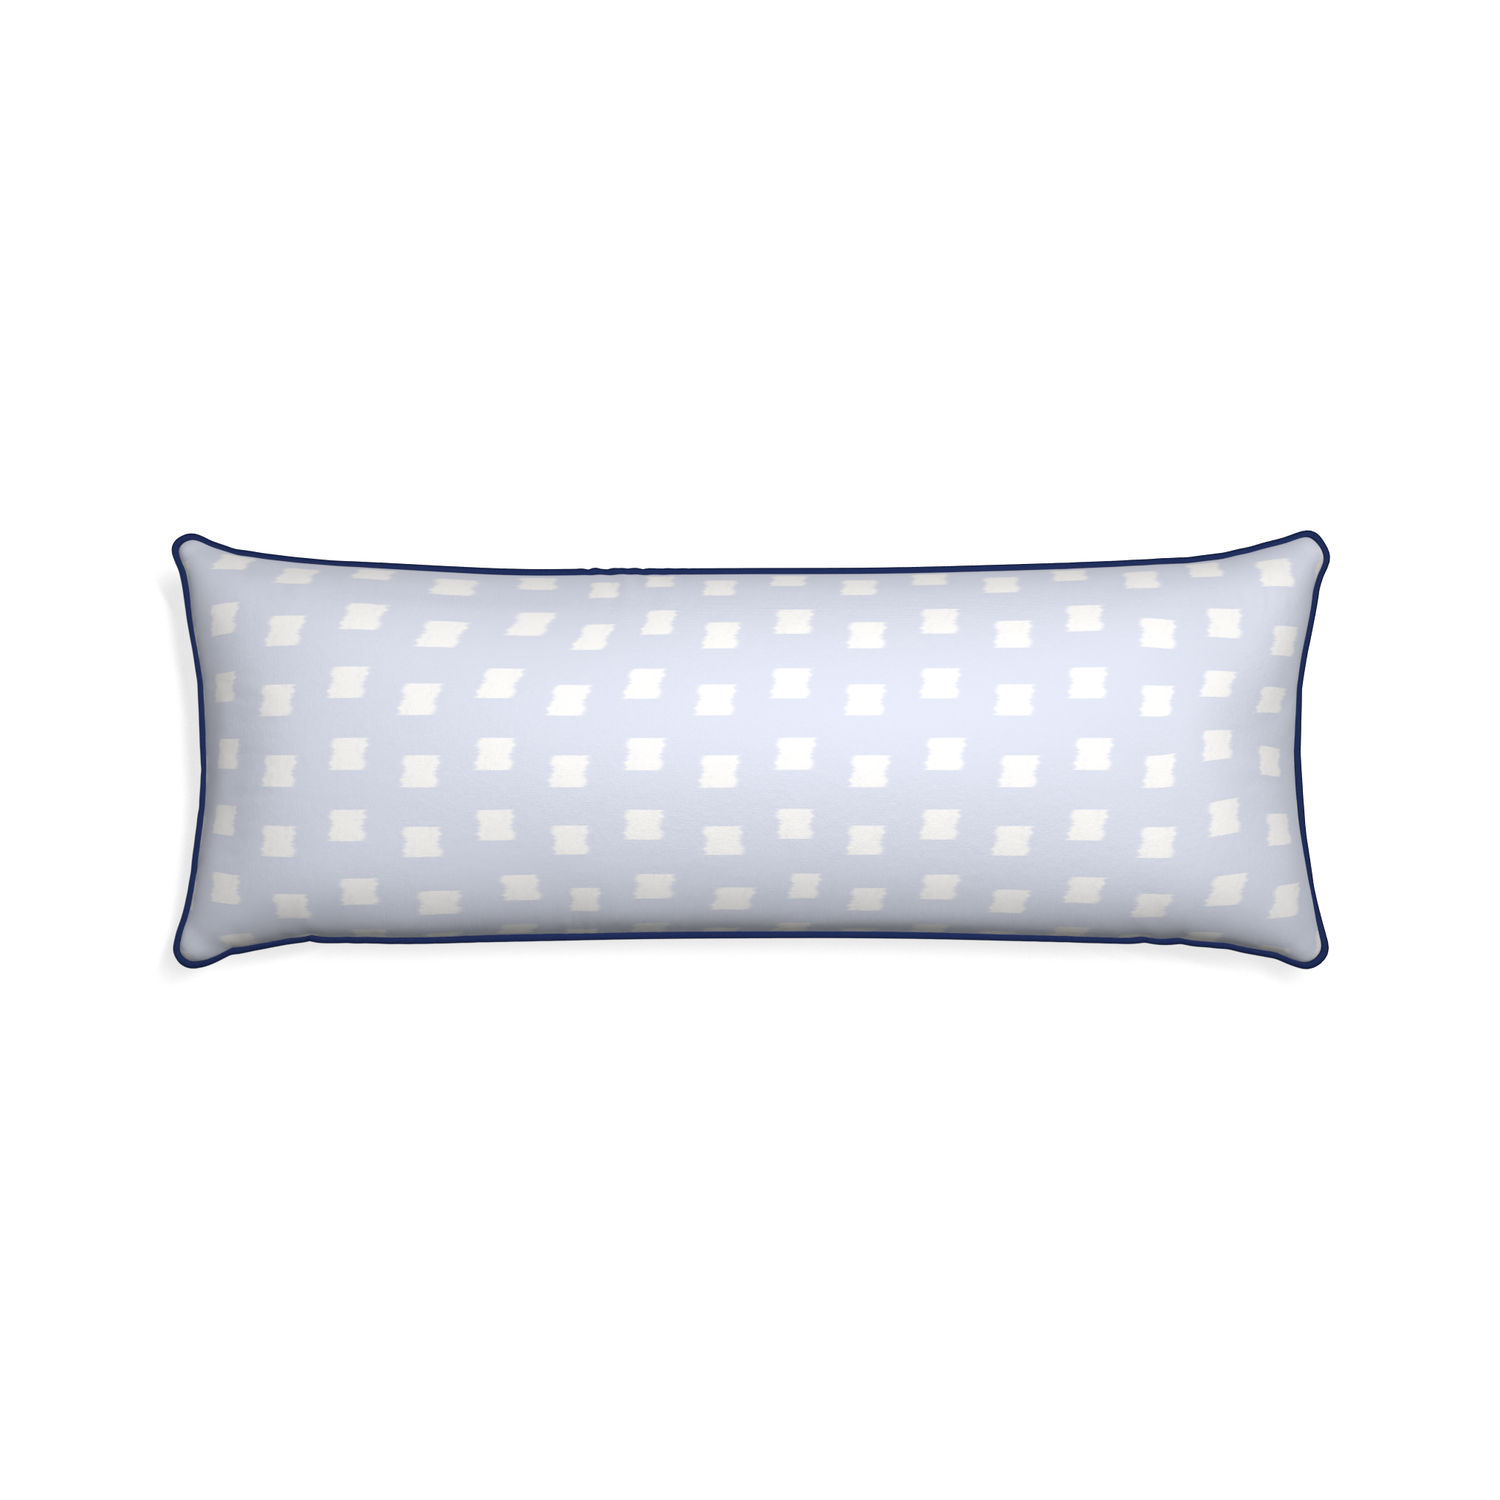 Xl-lumbar denton custom pillow with midnight piping on white background